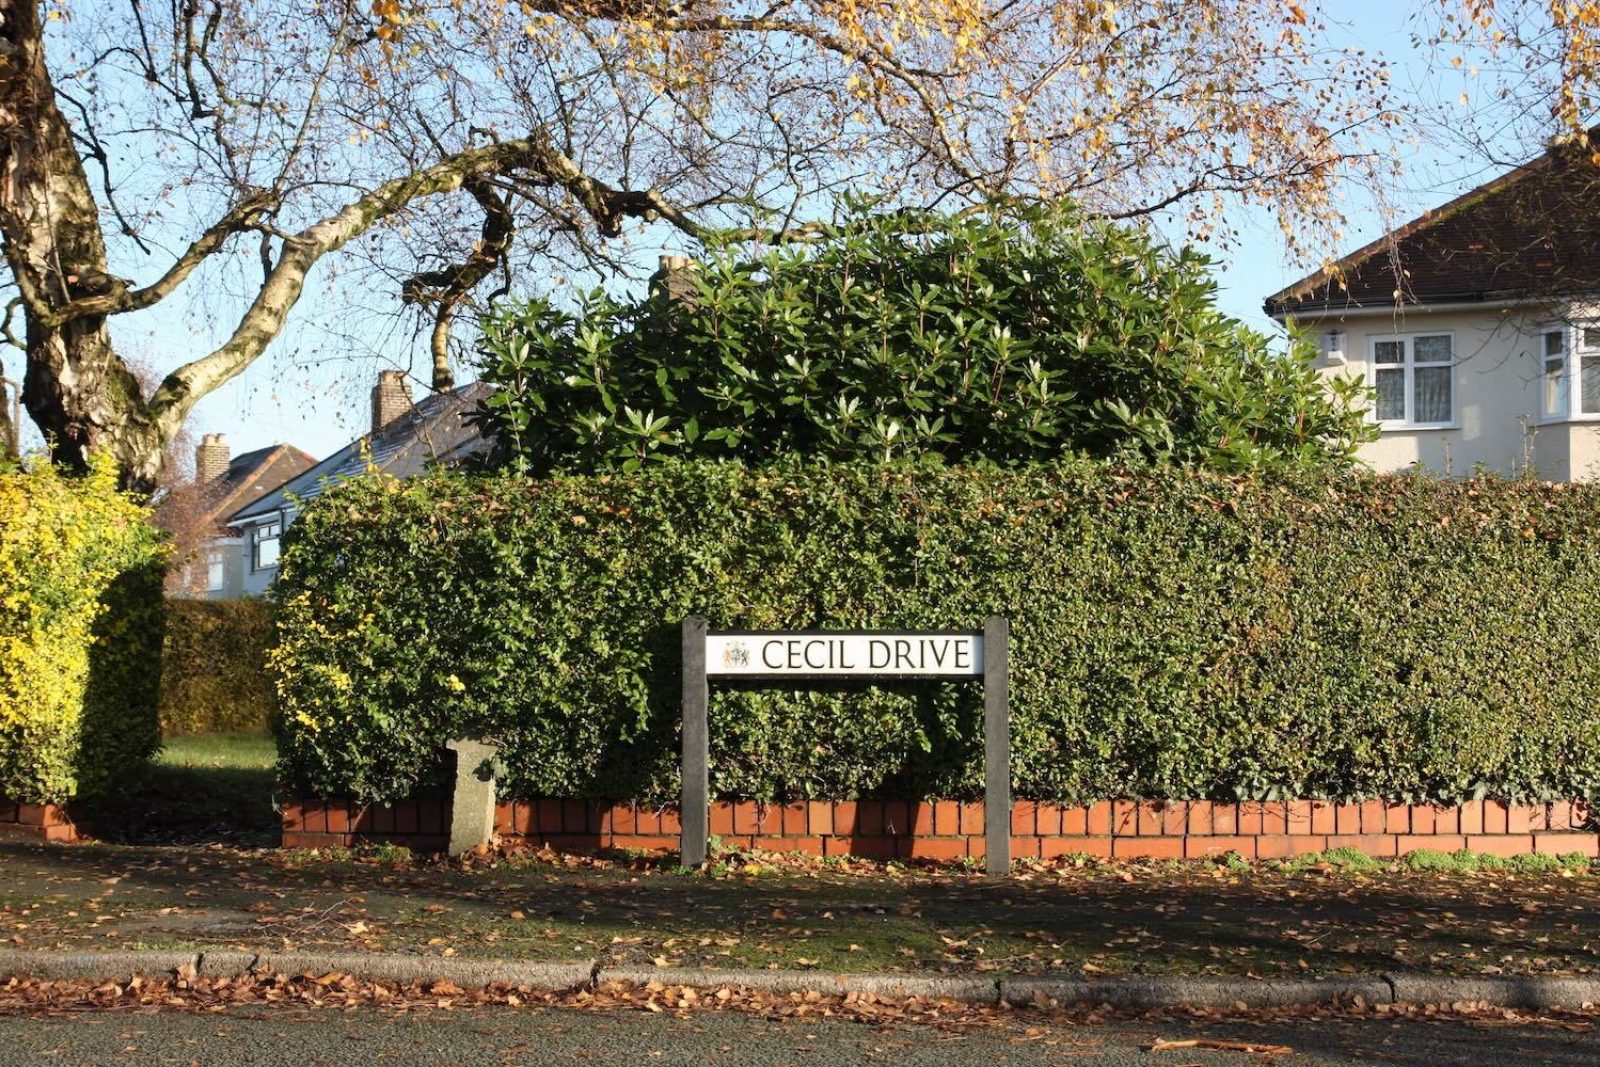 A photograph of a street sign that reads 'Cecil Drive'. Behind it is a short red brick wall with a hedge growing above it. There is a White House in the background and a tree with few leaves left on it. It is a sunny day and there are autumn leaves on the pavement and road in front of the street sign.